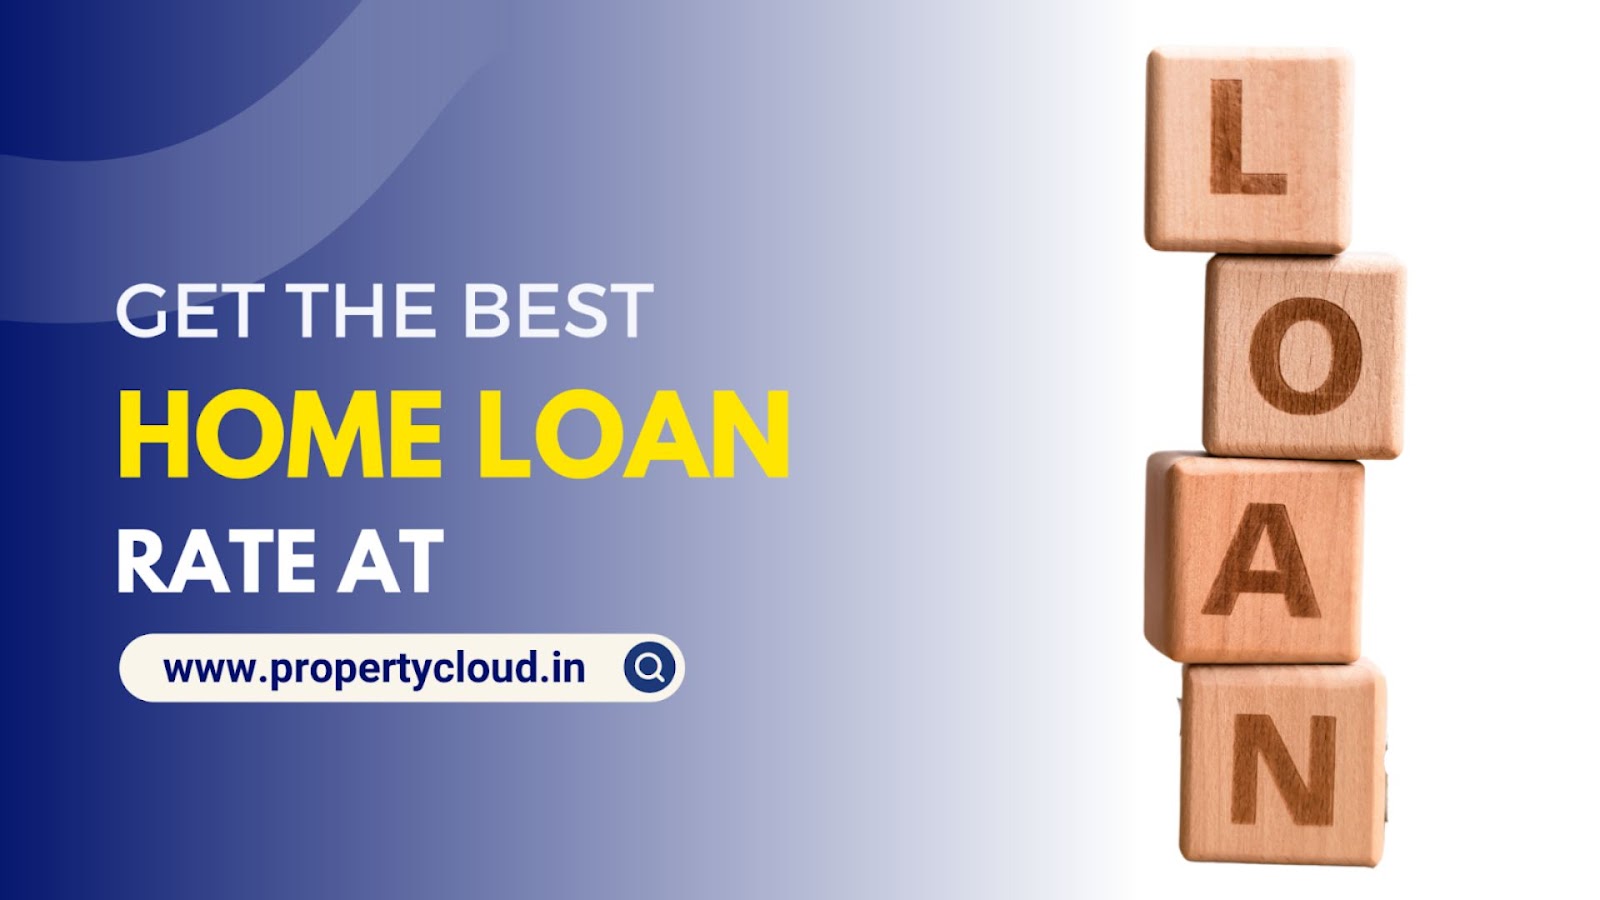 Secure the top home loan rate through PropertyCloud. Before deciding to live near an airport, explore the pros and cons for a clear understanding.